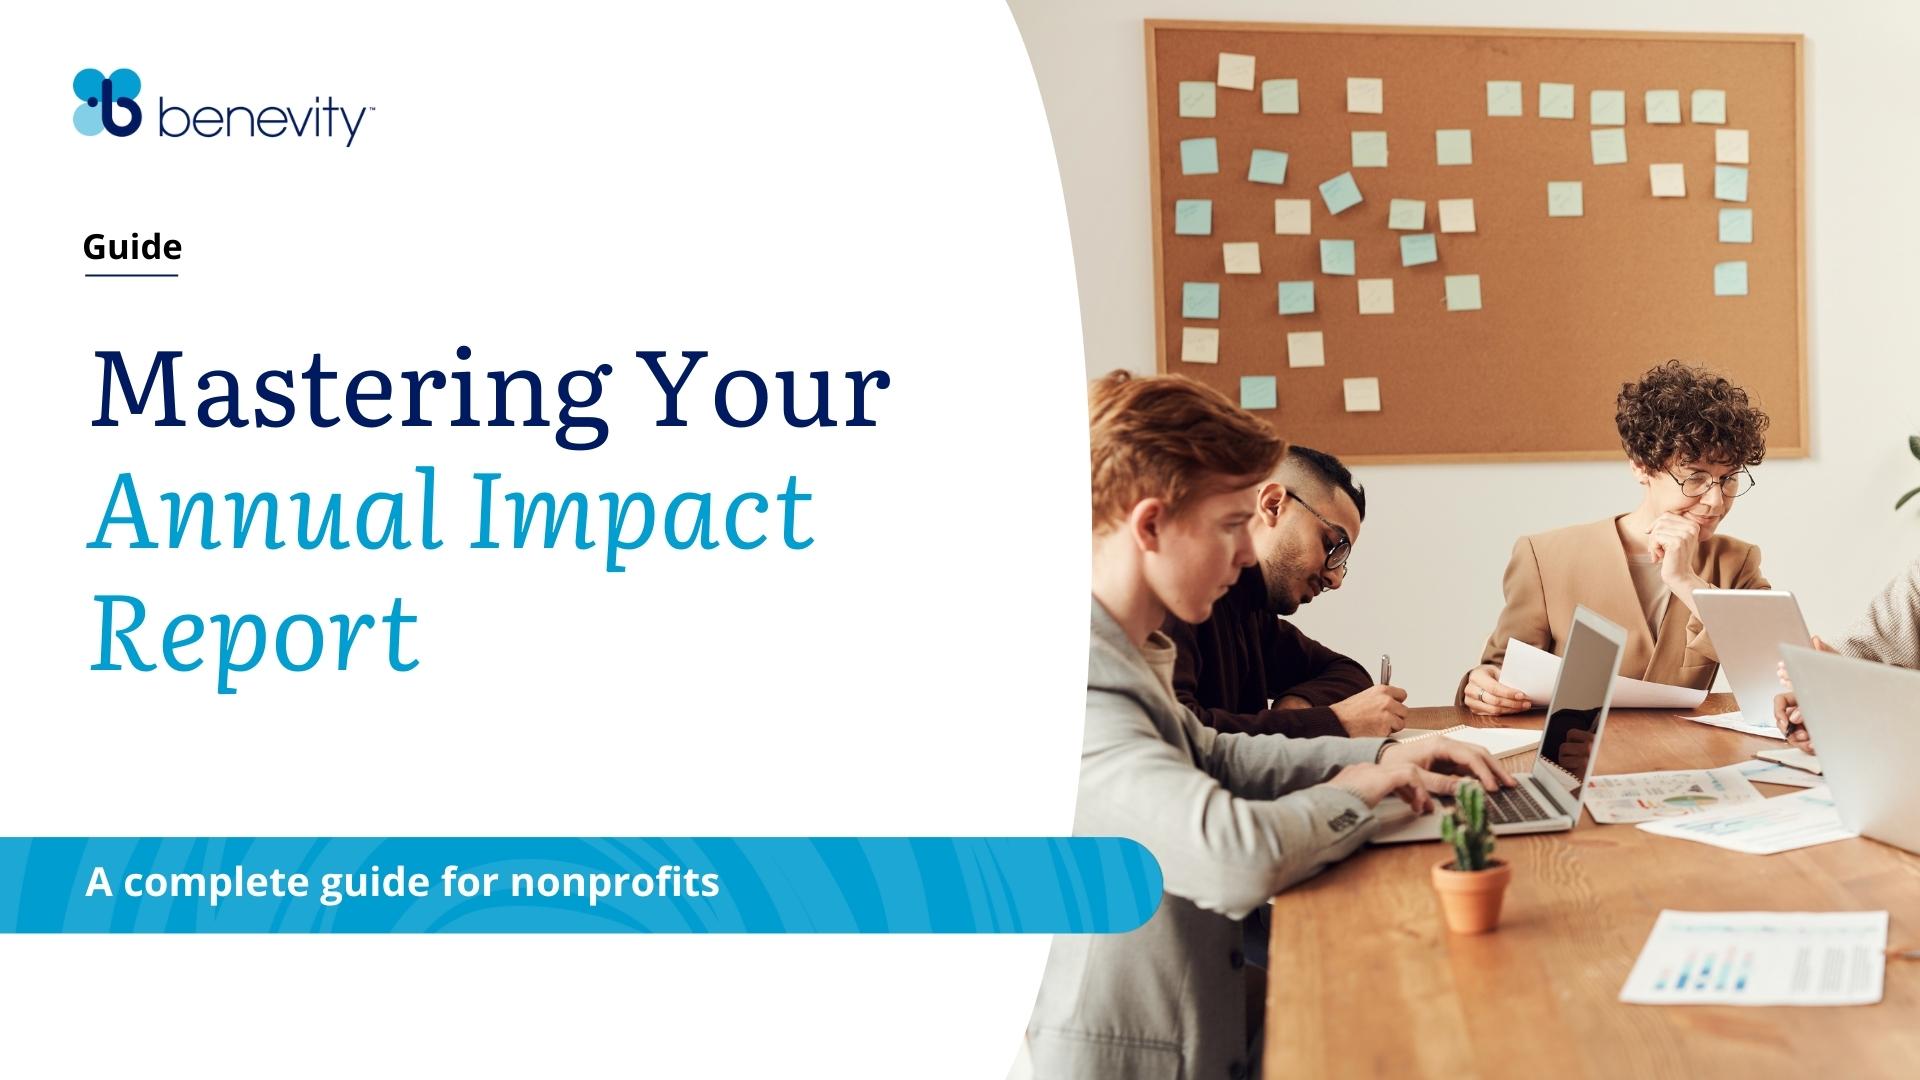 Benevity Guide Mastering your Annual Impact Report-2